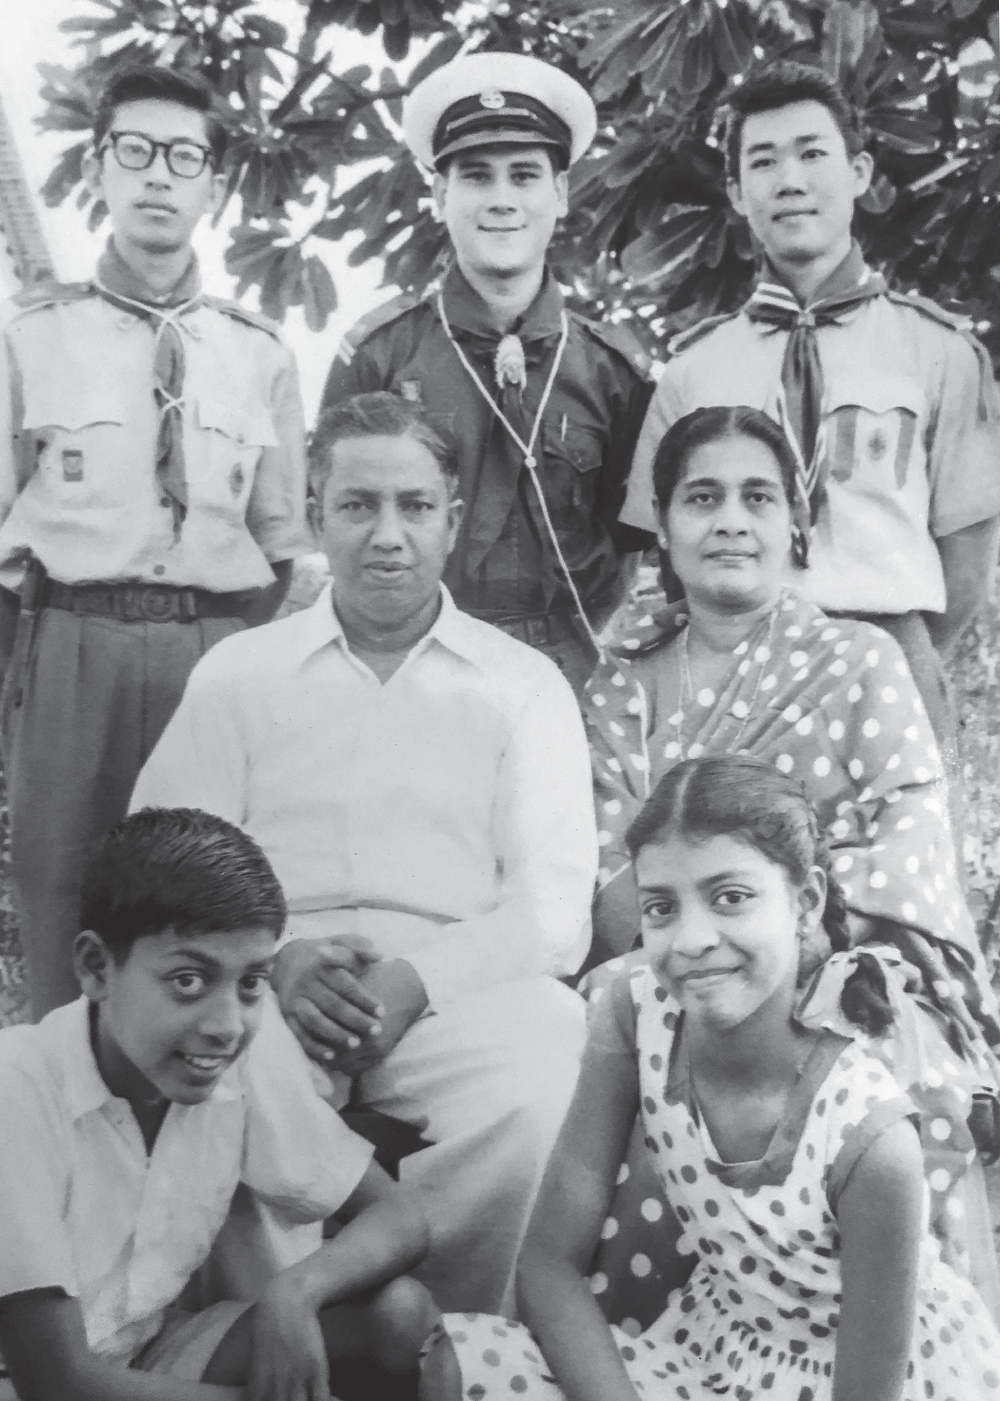 Photograph of the author with his parents and two of his scout friends, and two children - a boy and a girl - seated in front of his parents.